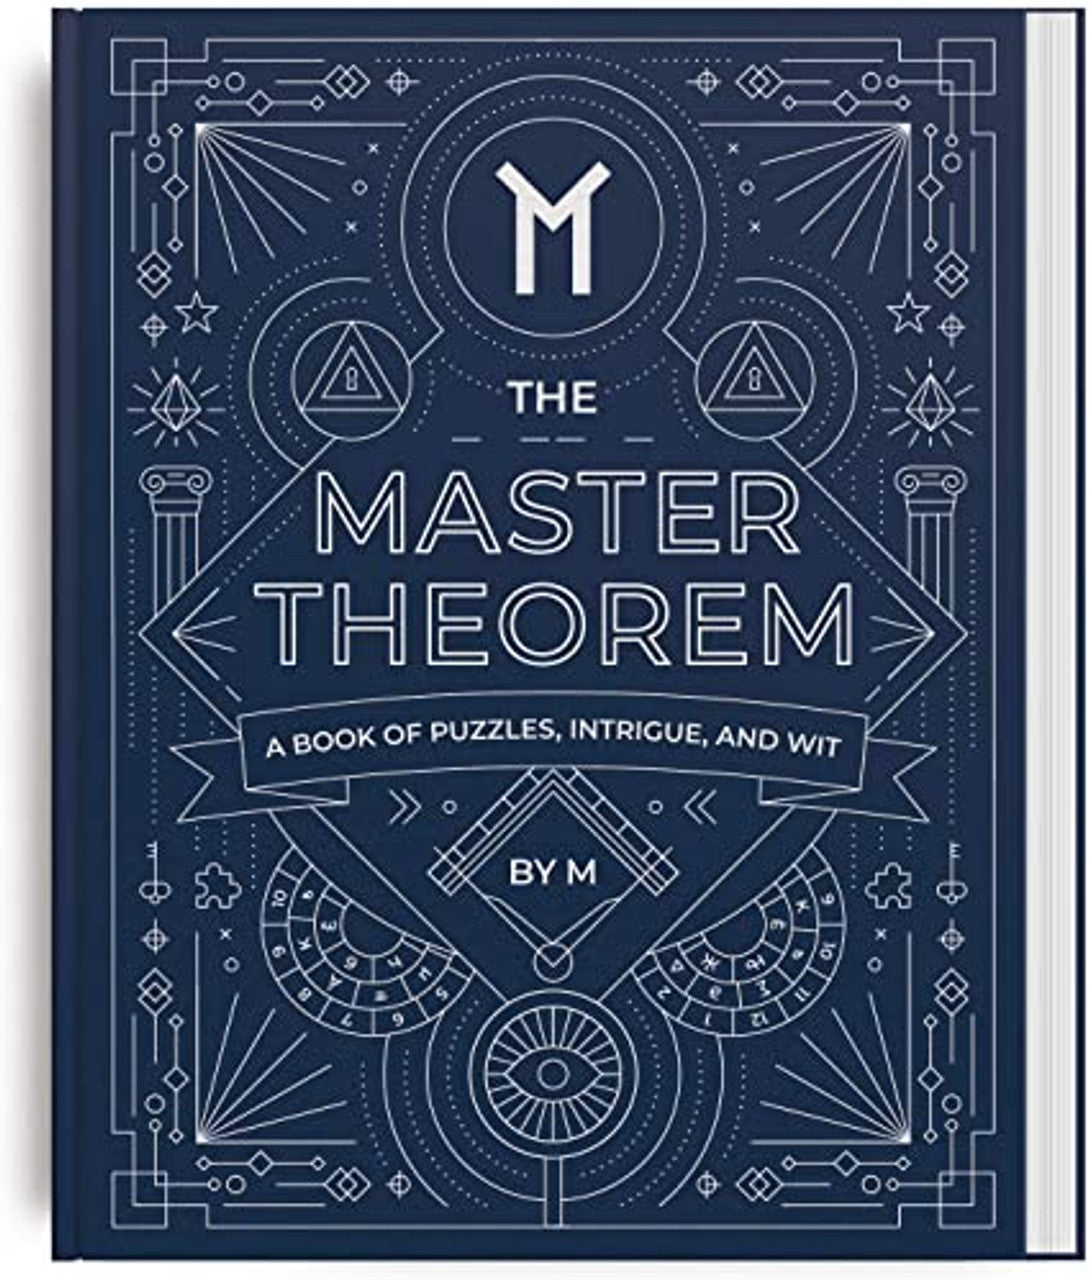 The Master Theorem: A Book of Puzzles, Intrigue, And Wit